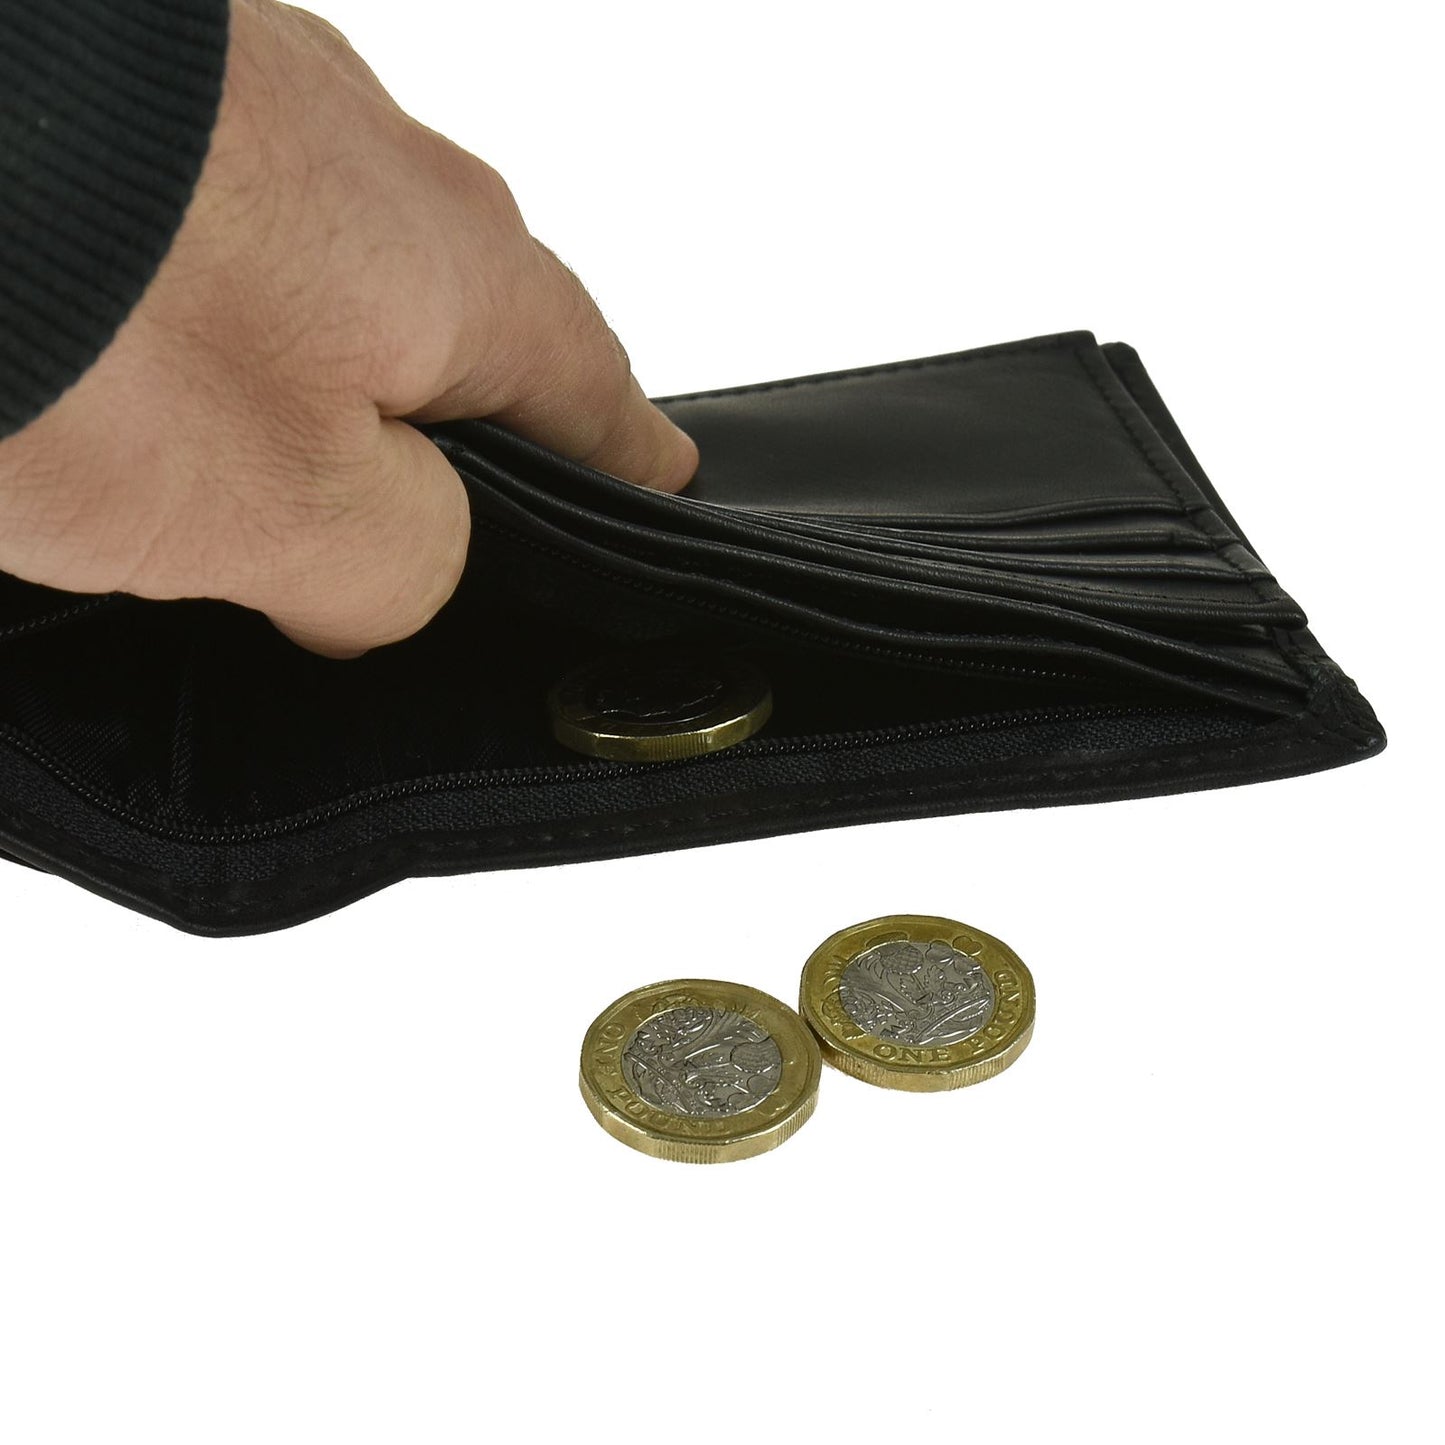 Keep Your Cash Safe with a Stud Strap Wallet